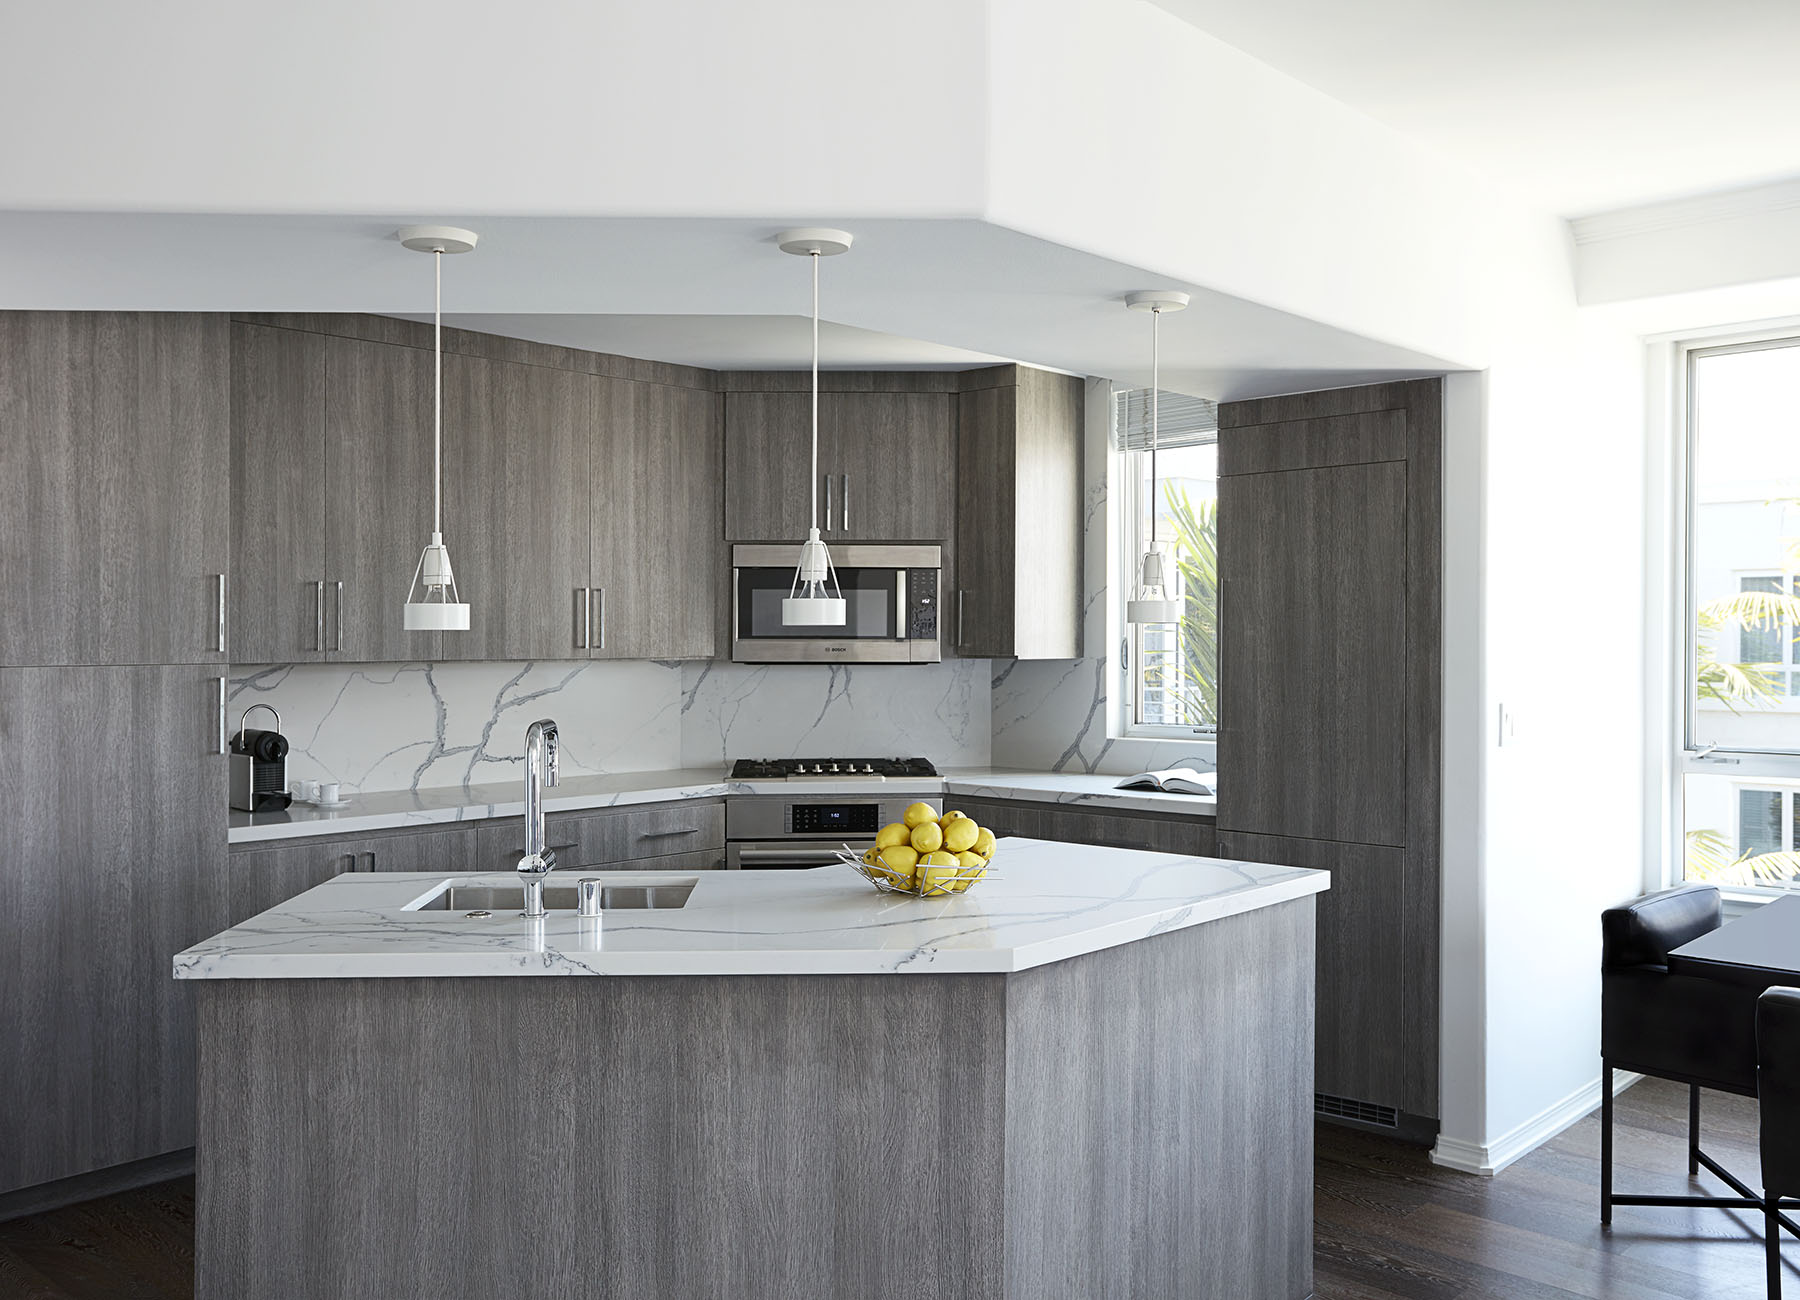 AKA Beverly Hills penthouse kitchen with gray cabinets